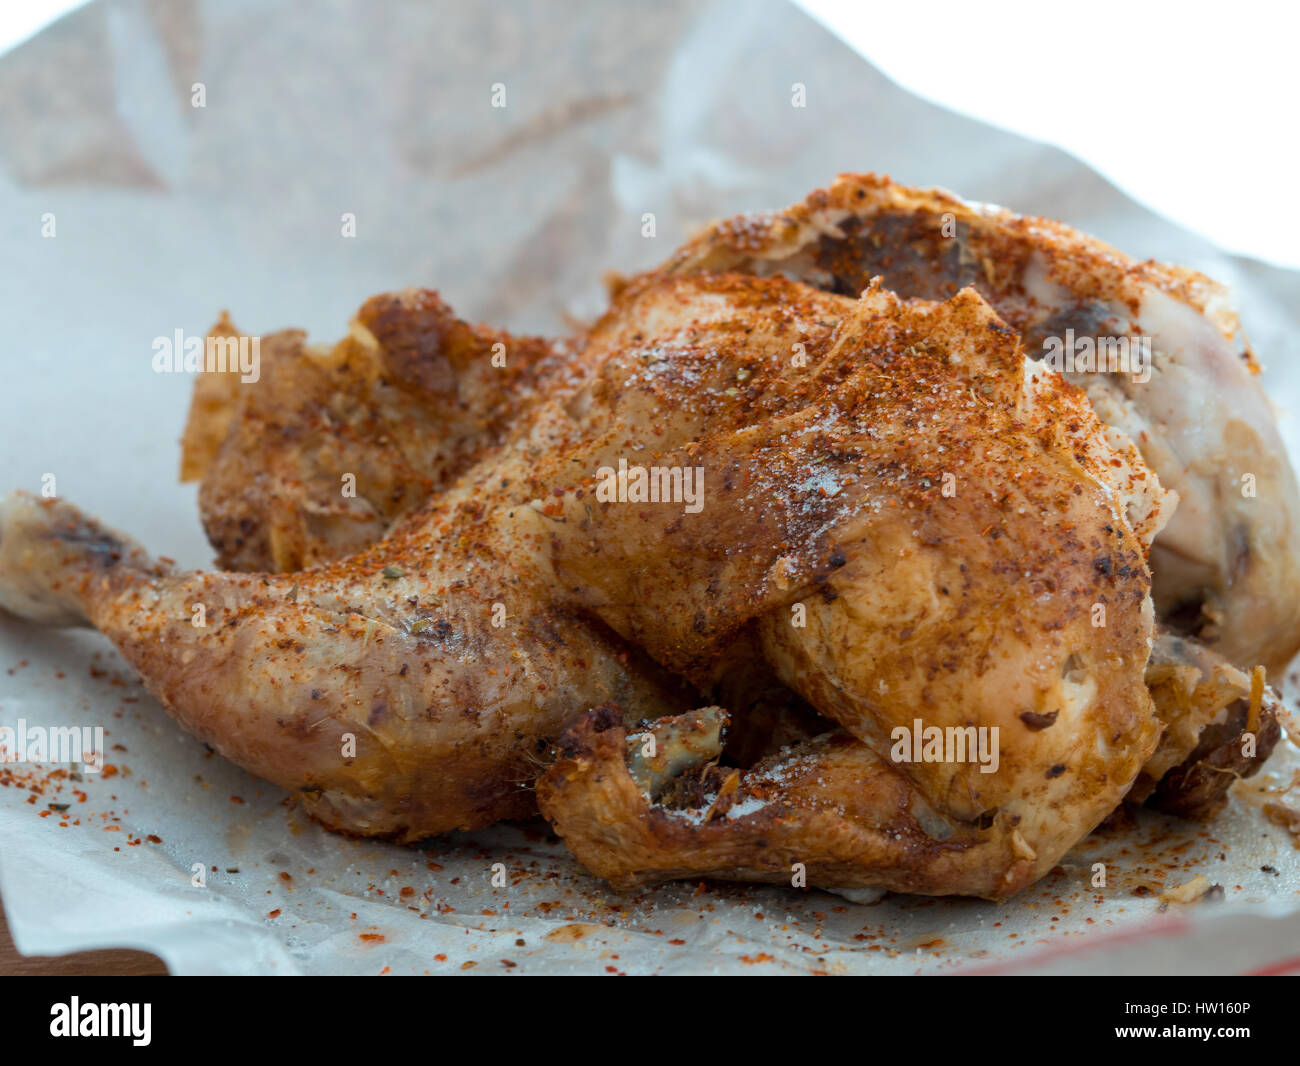 Whole roast grilled chicken on a white paper Stock Photo